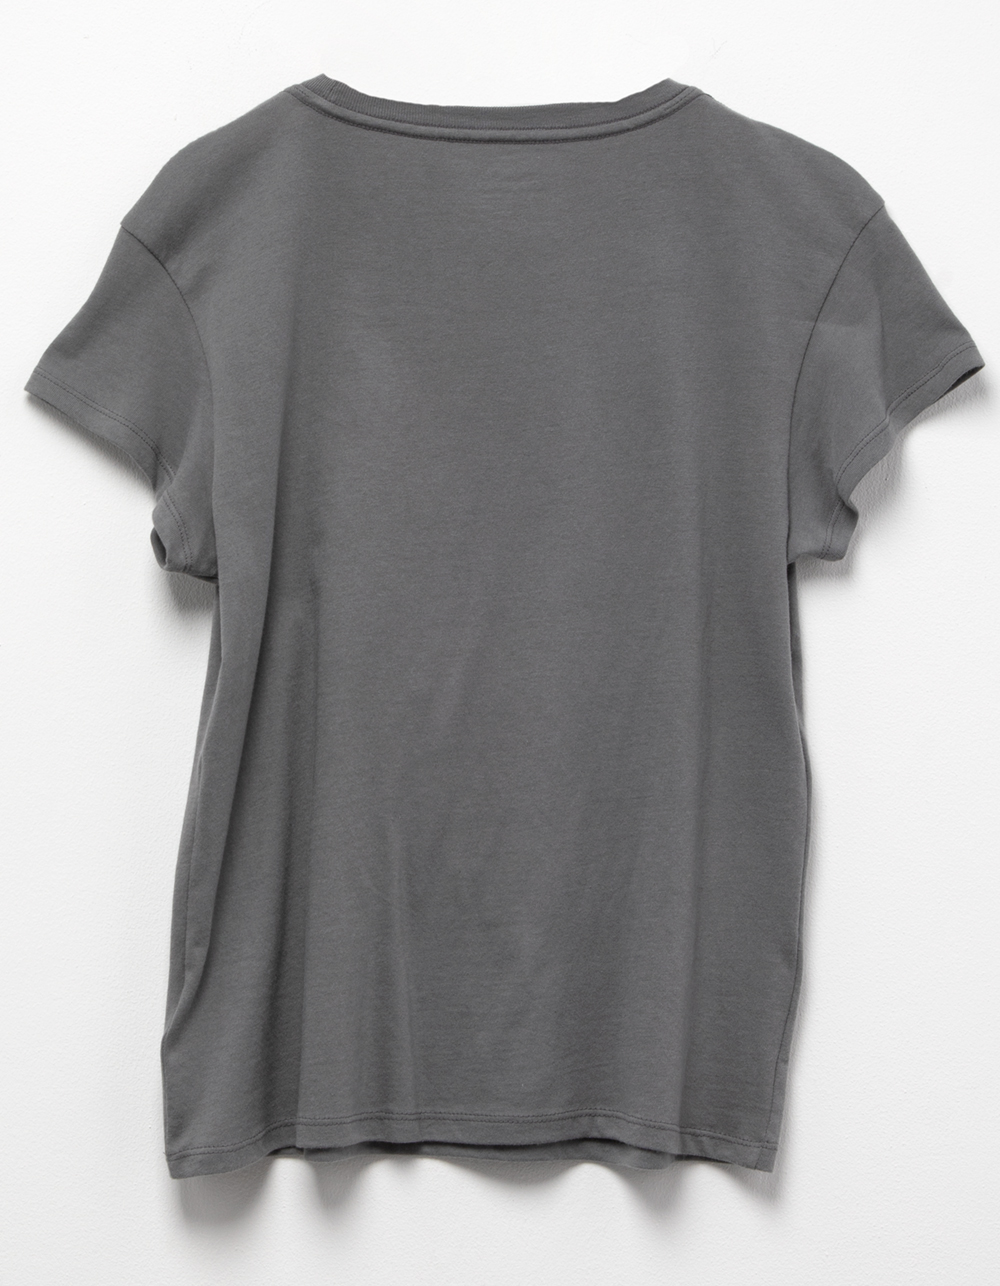 O'NEILL Keep Smiling Girls Oversized Tee - CHARCOAL | Tillys